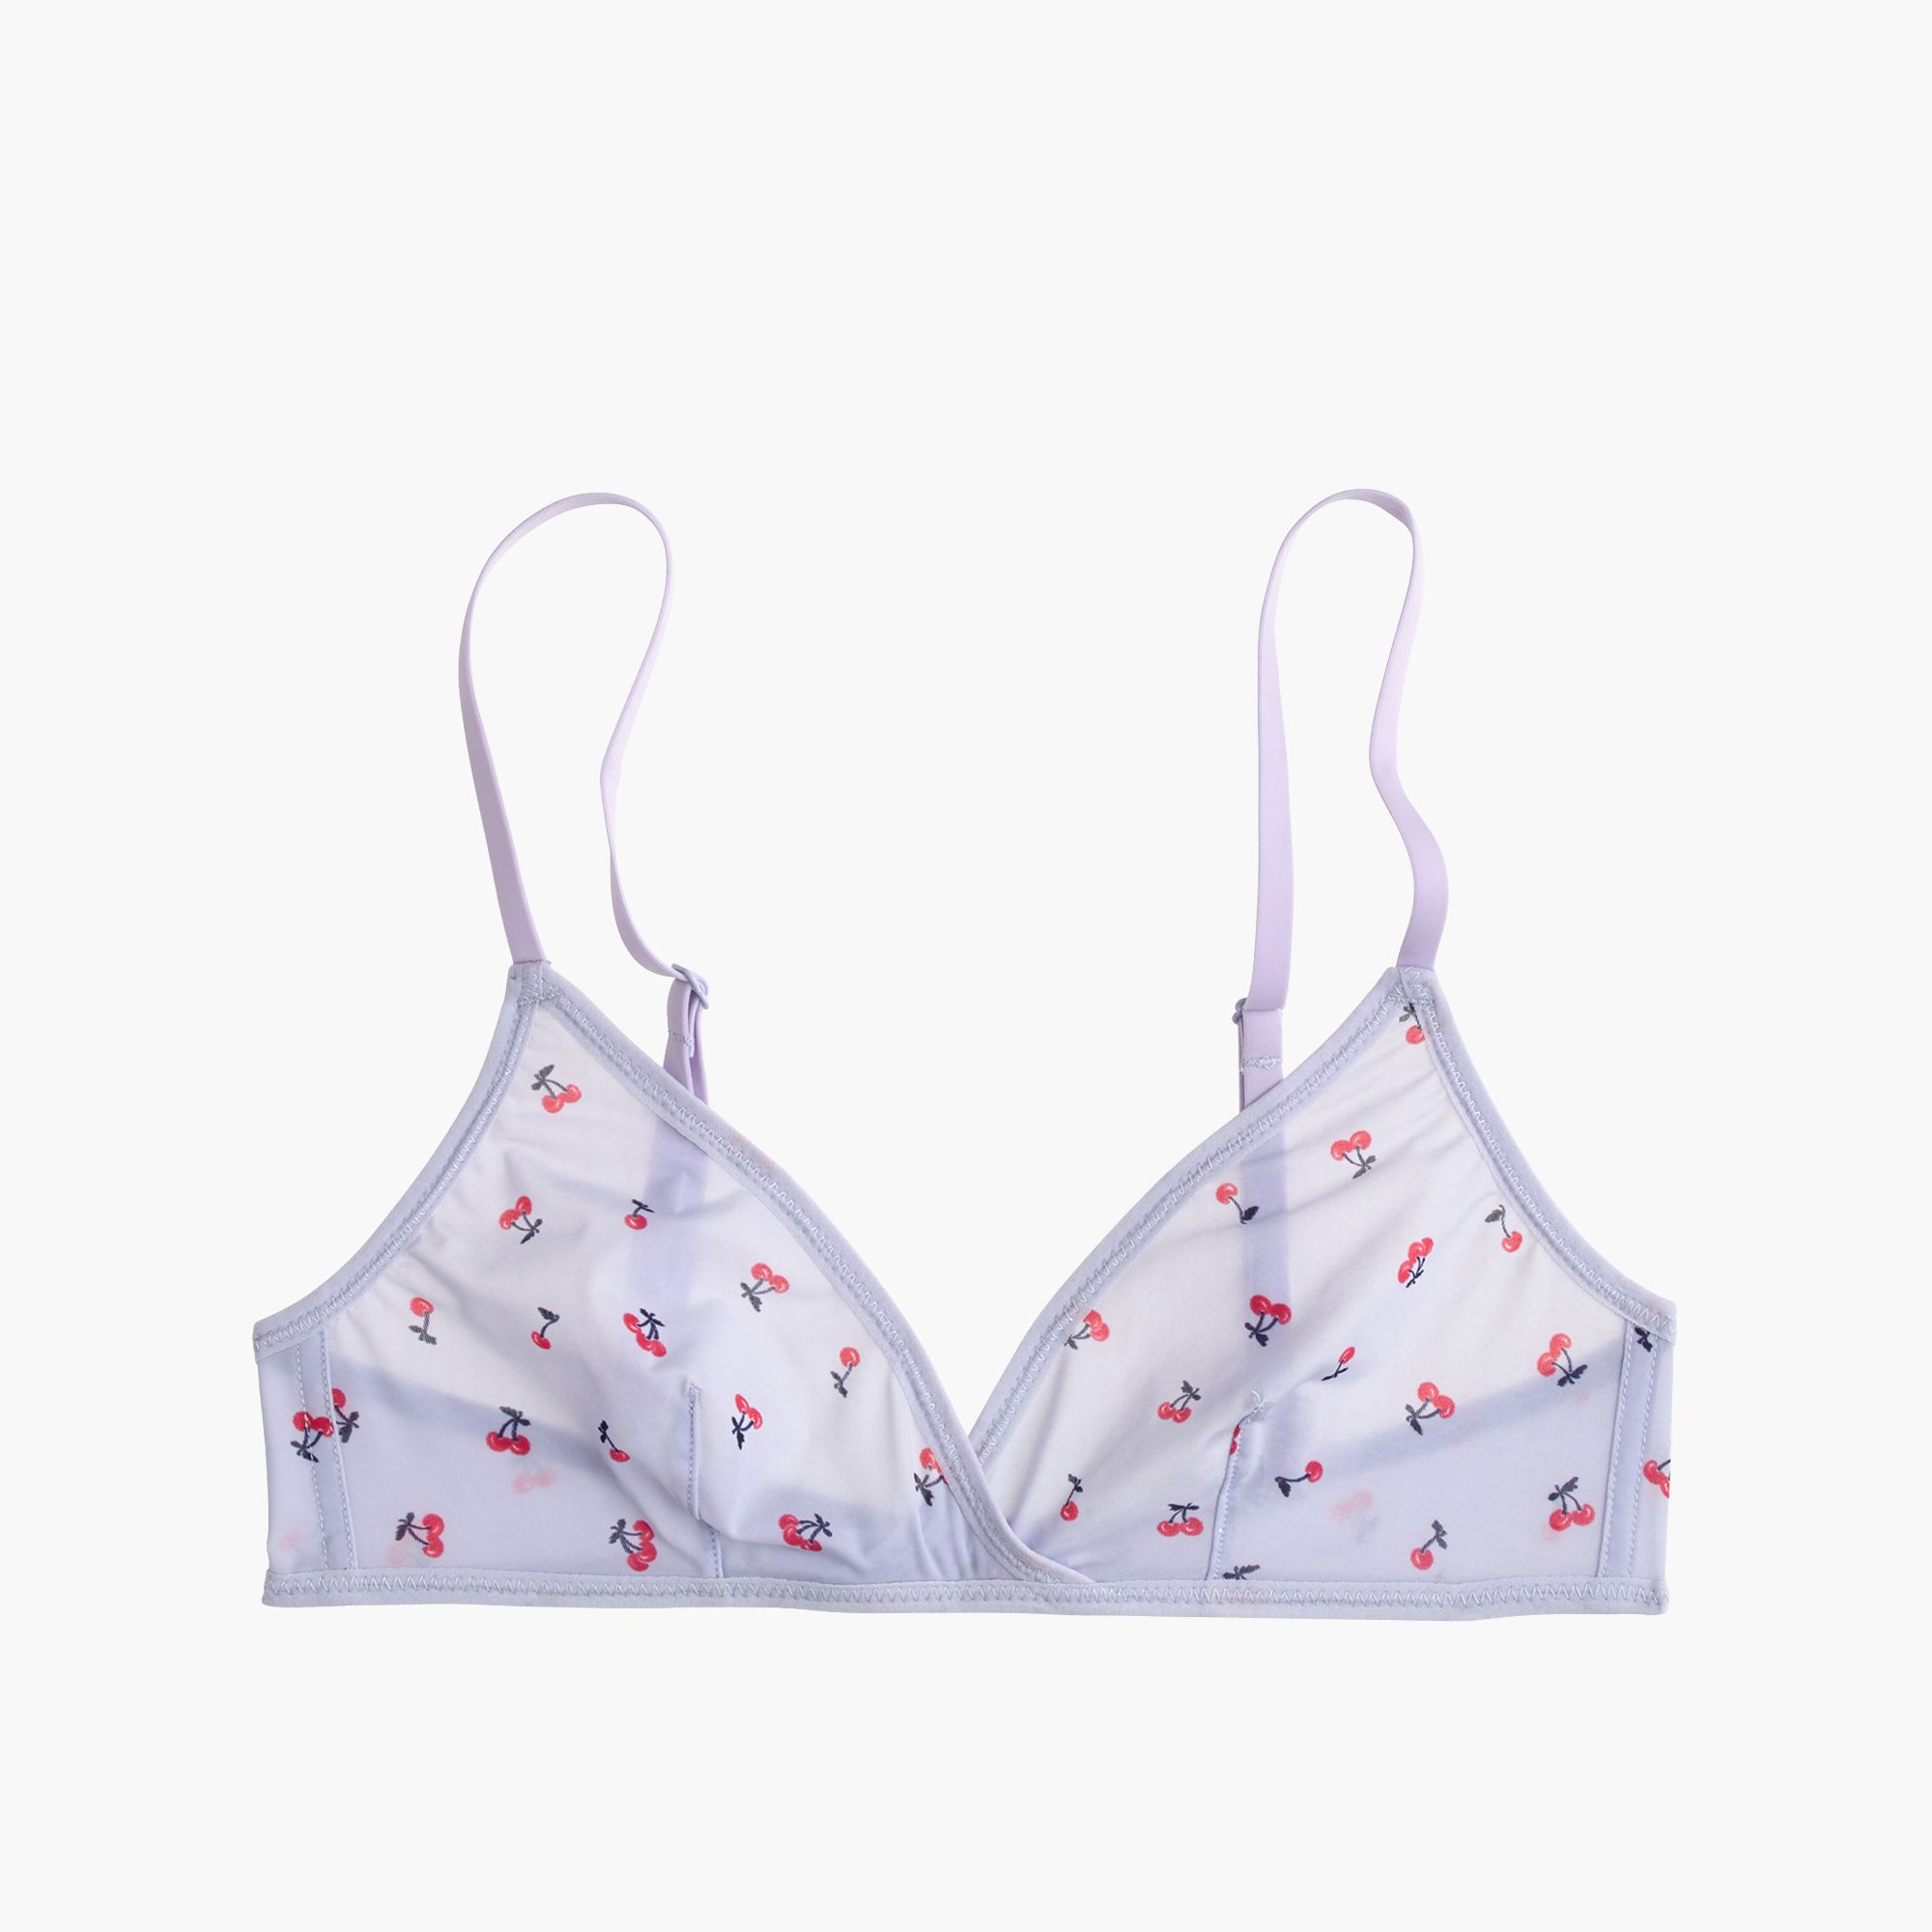 J.Crew's New Lingerie Collection Is Bralette Heaven